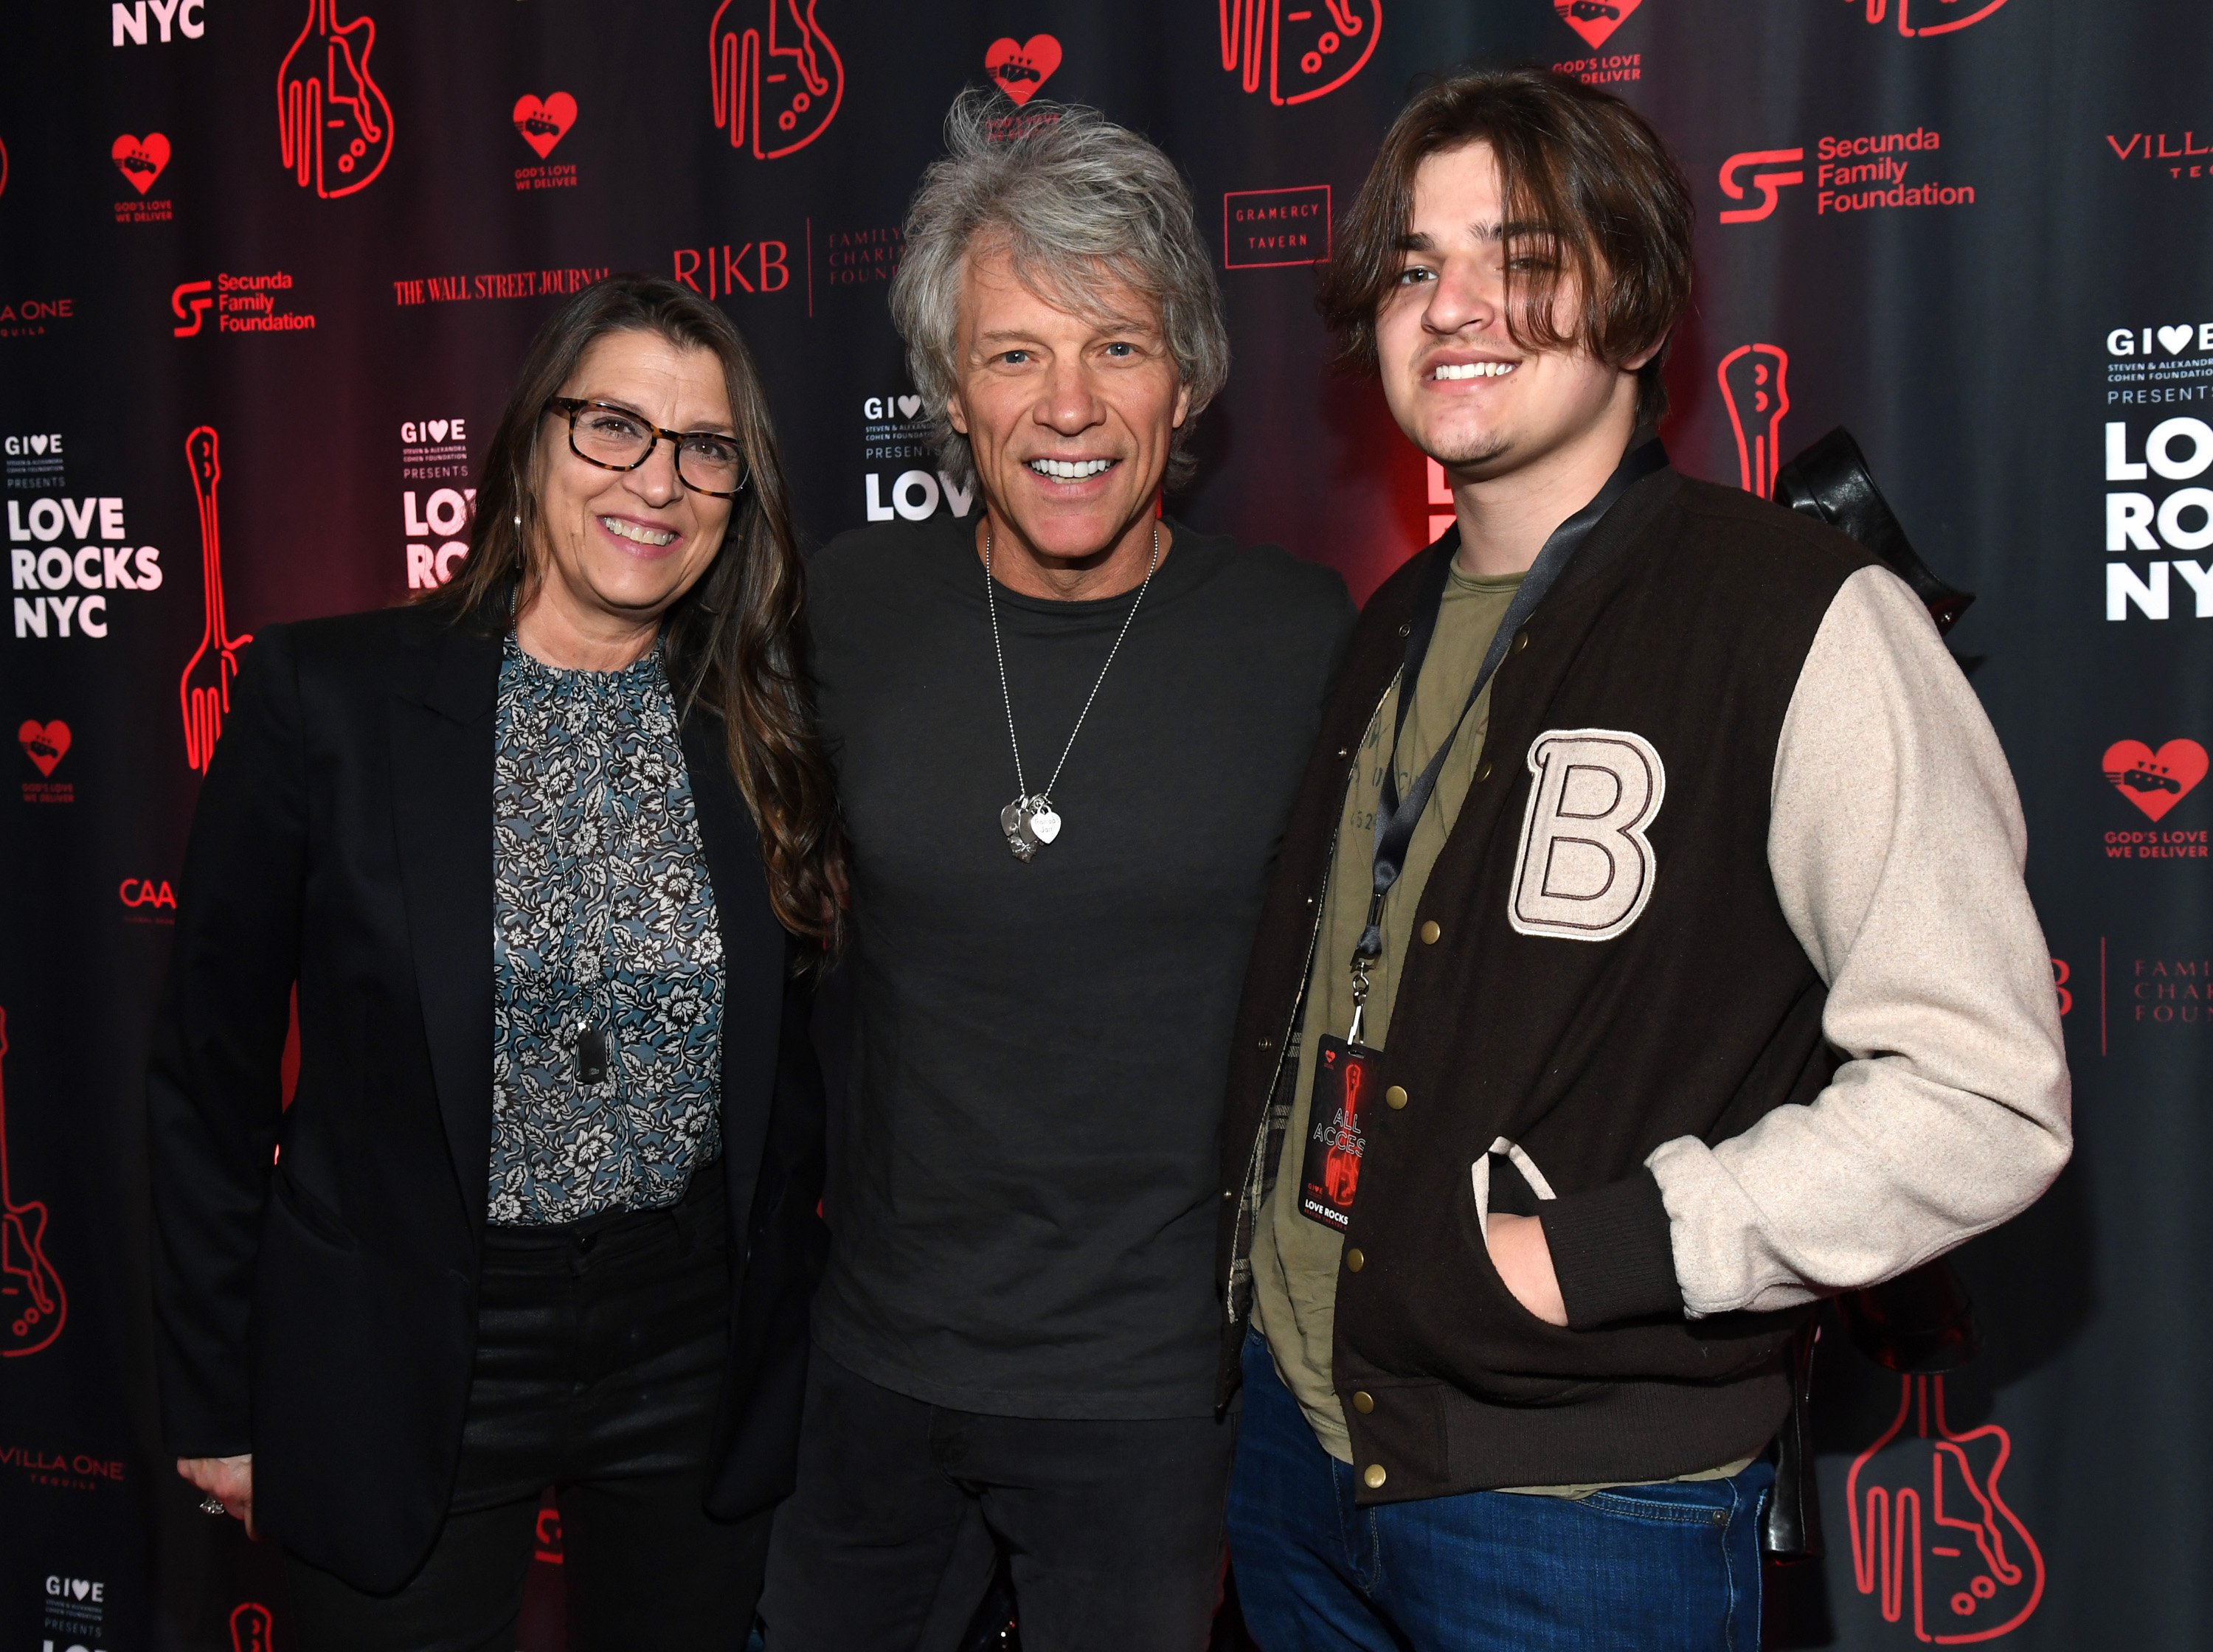 Dorothea Hurley, Jon Bon Jovi, and Romeo Bongiovi at the Fifth Annual LOVE ROCKS NYC Benefit Concert on June 3, 2021, in New York | Source: Getty Images